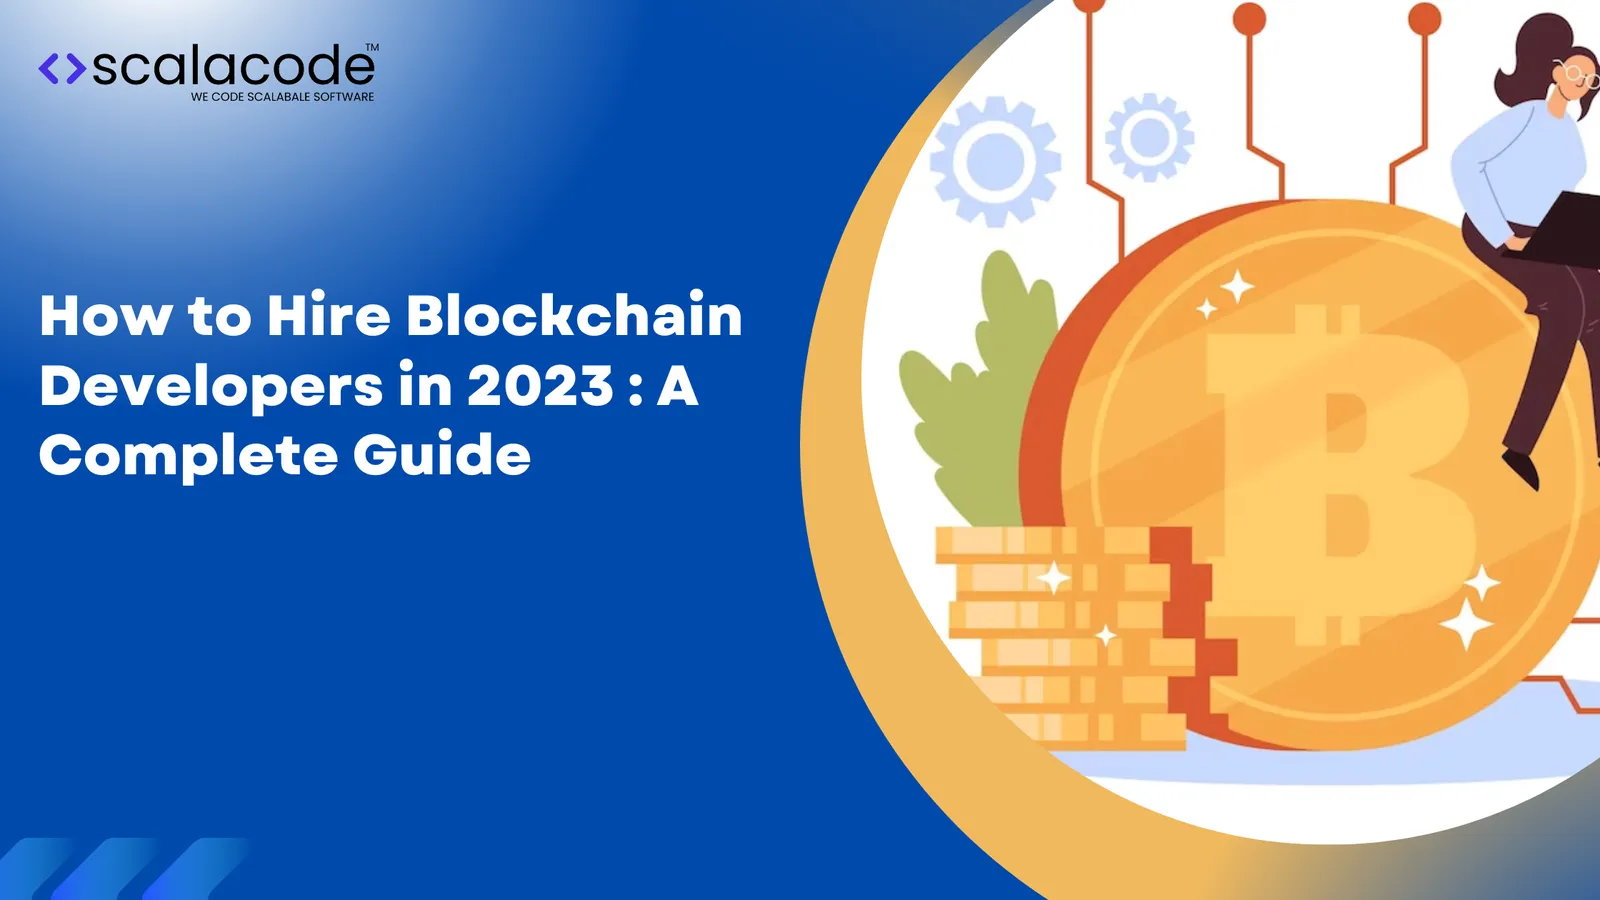 How to Hire Blockchain Developers in 2023 : A Complete Guide